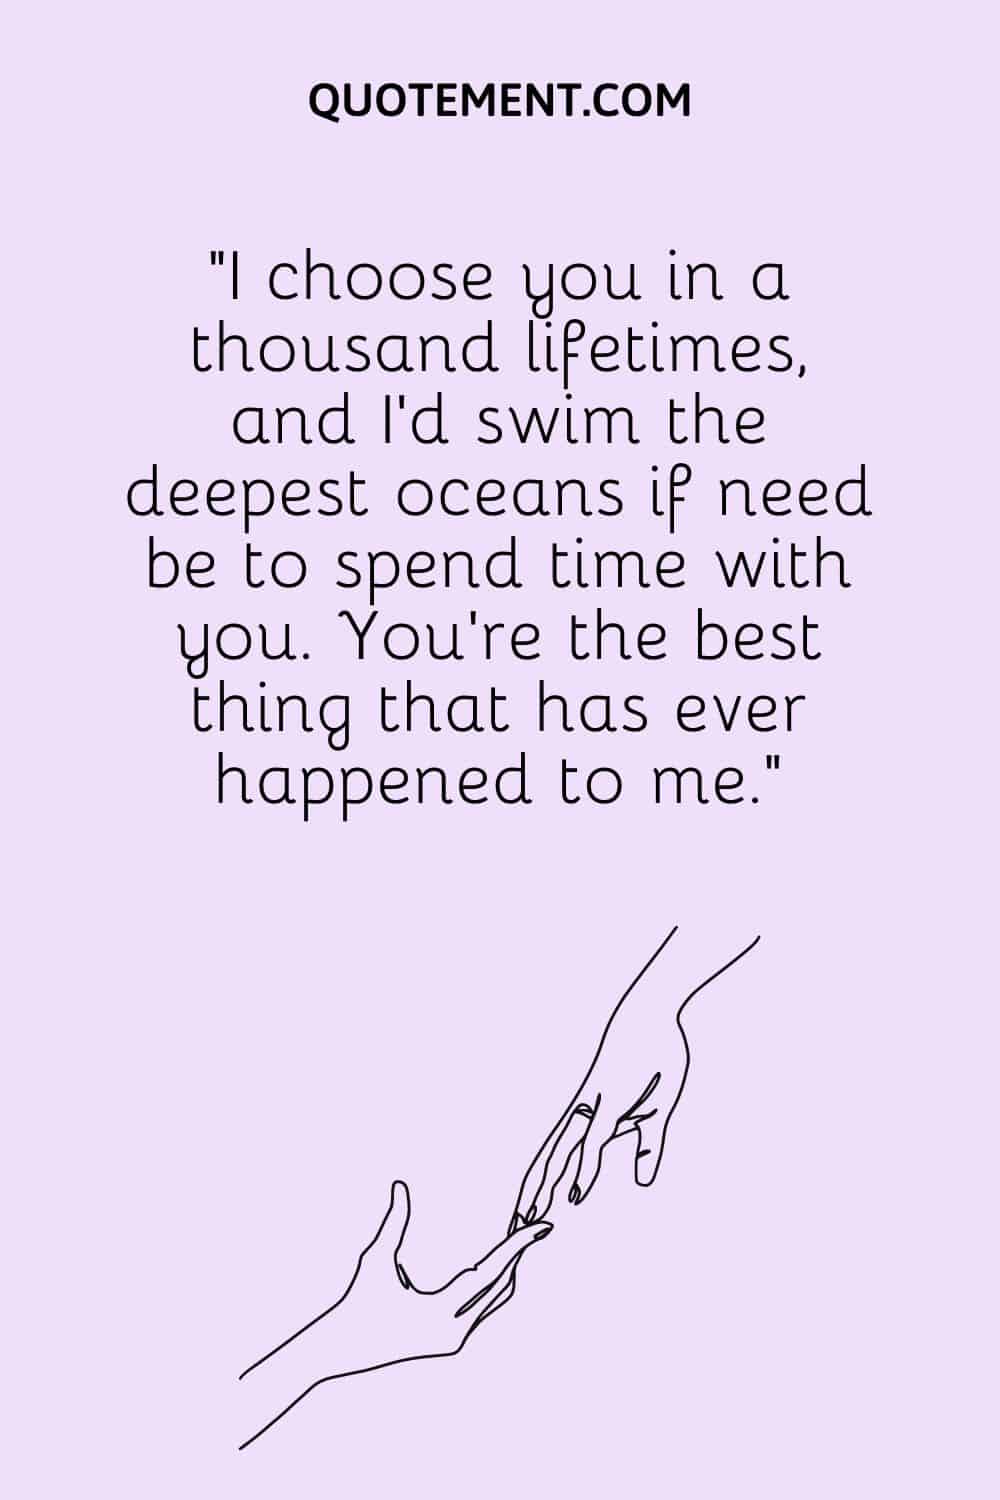 I choose you in a thousand lifetimes, and I’d swim the deepest oceans if need be to spend time with you.